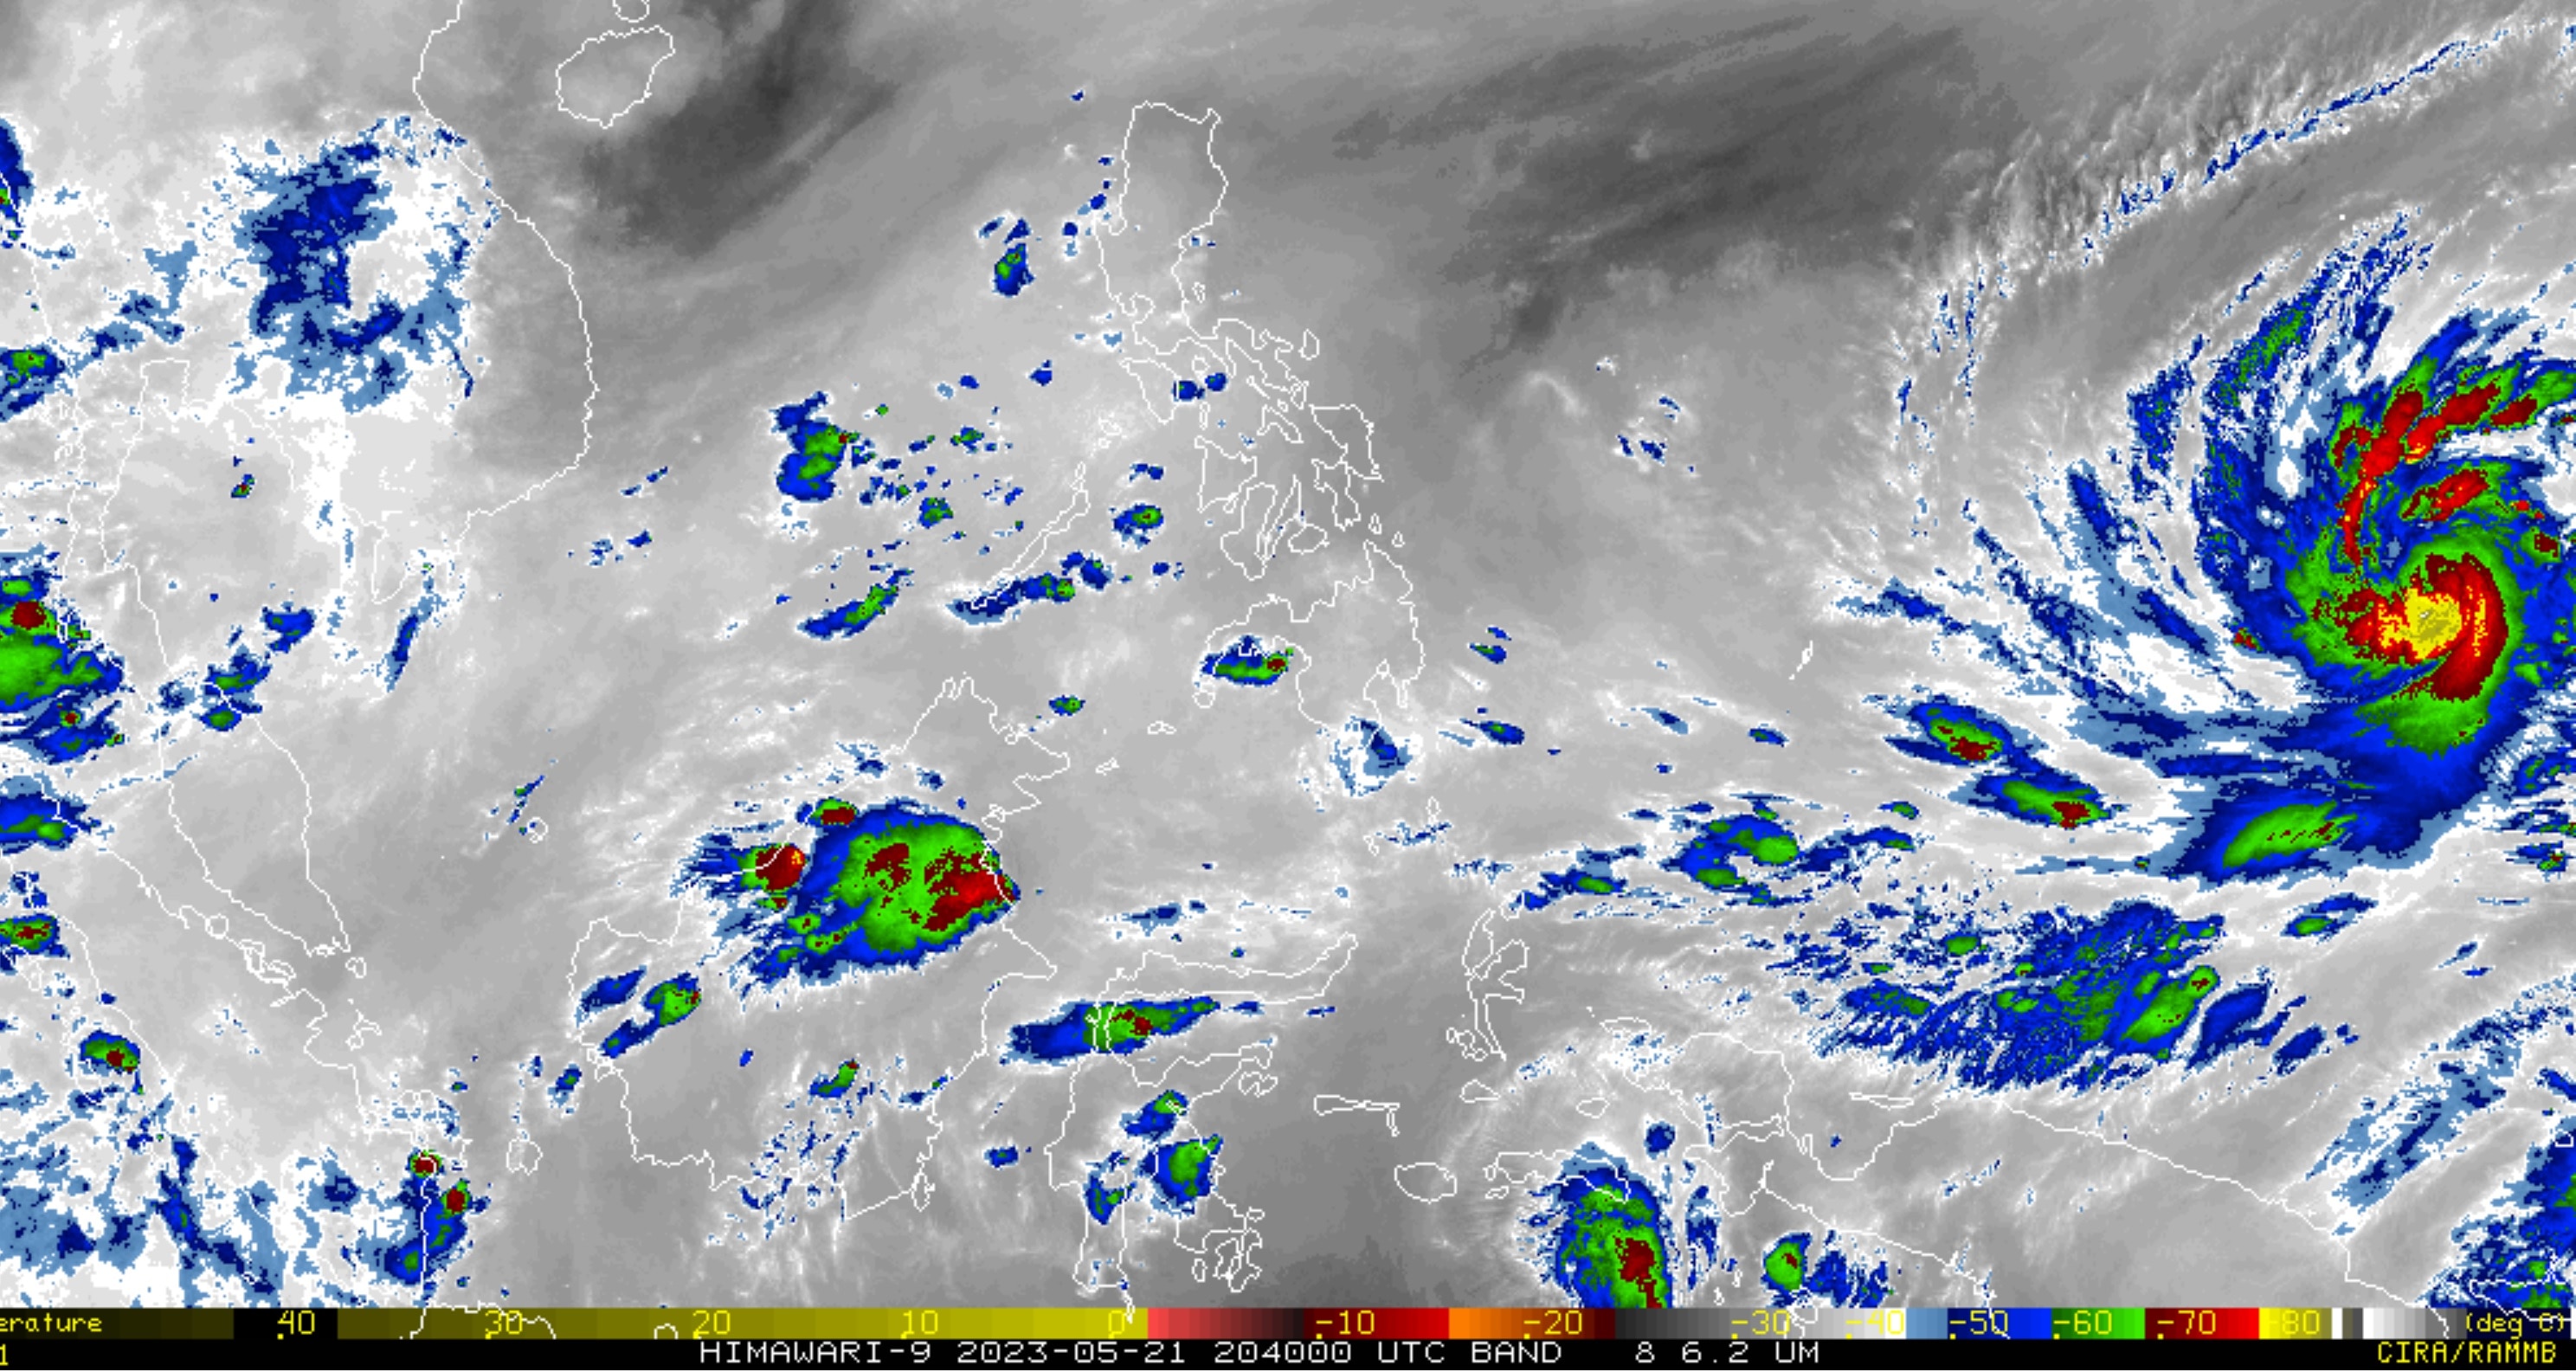 Himawari-8 Imagery of Typhoon Mawar near Philippines. Imagery courtesy of the Japanese Meteorological Agency